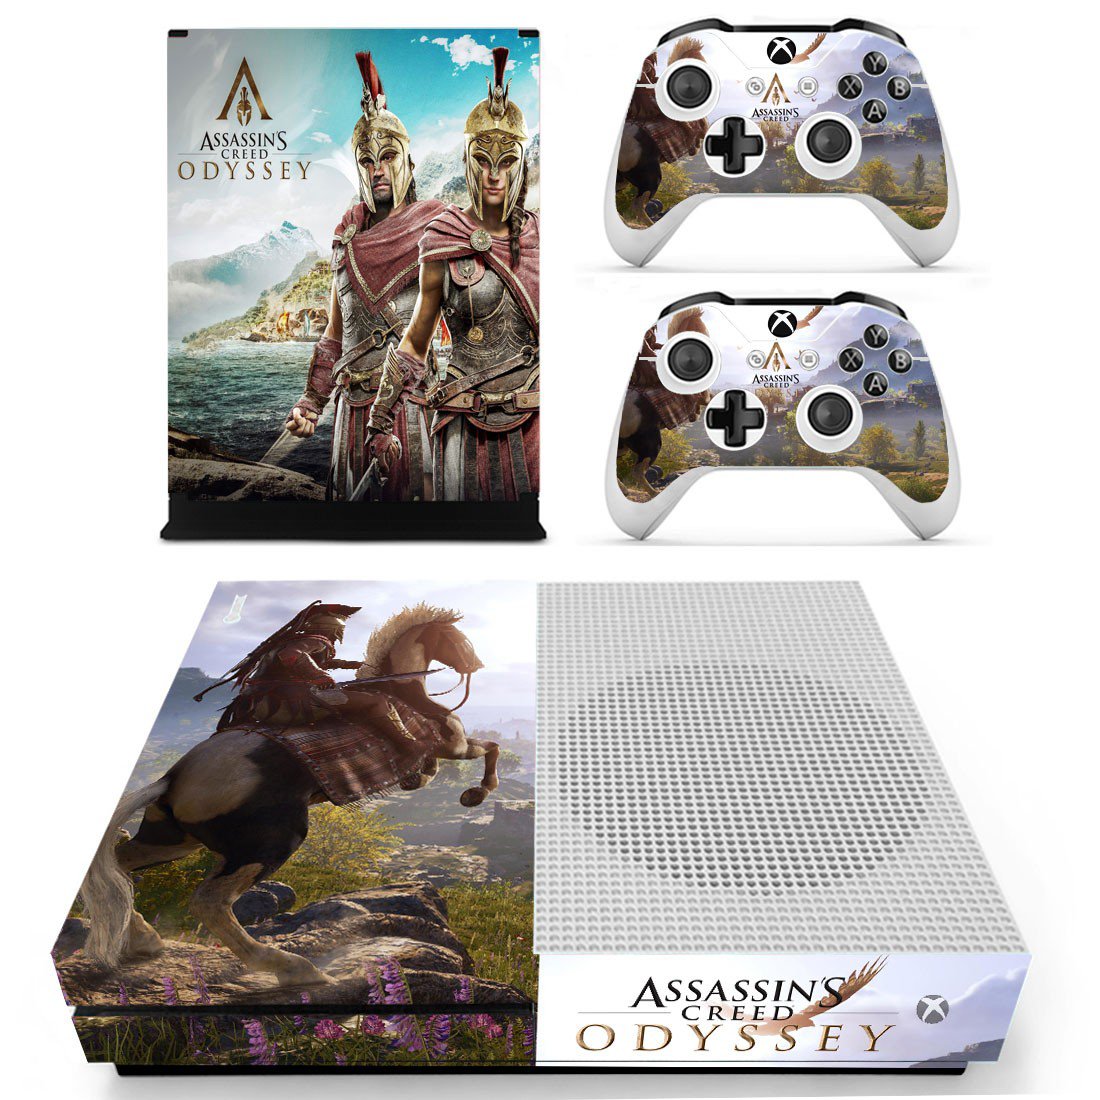 Assassins Creed Odyssey Sticker For Xbox One S And Controllers